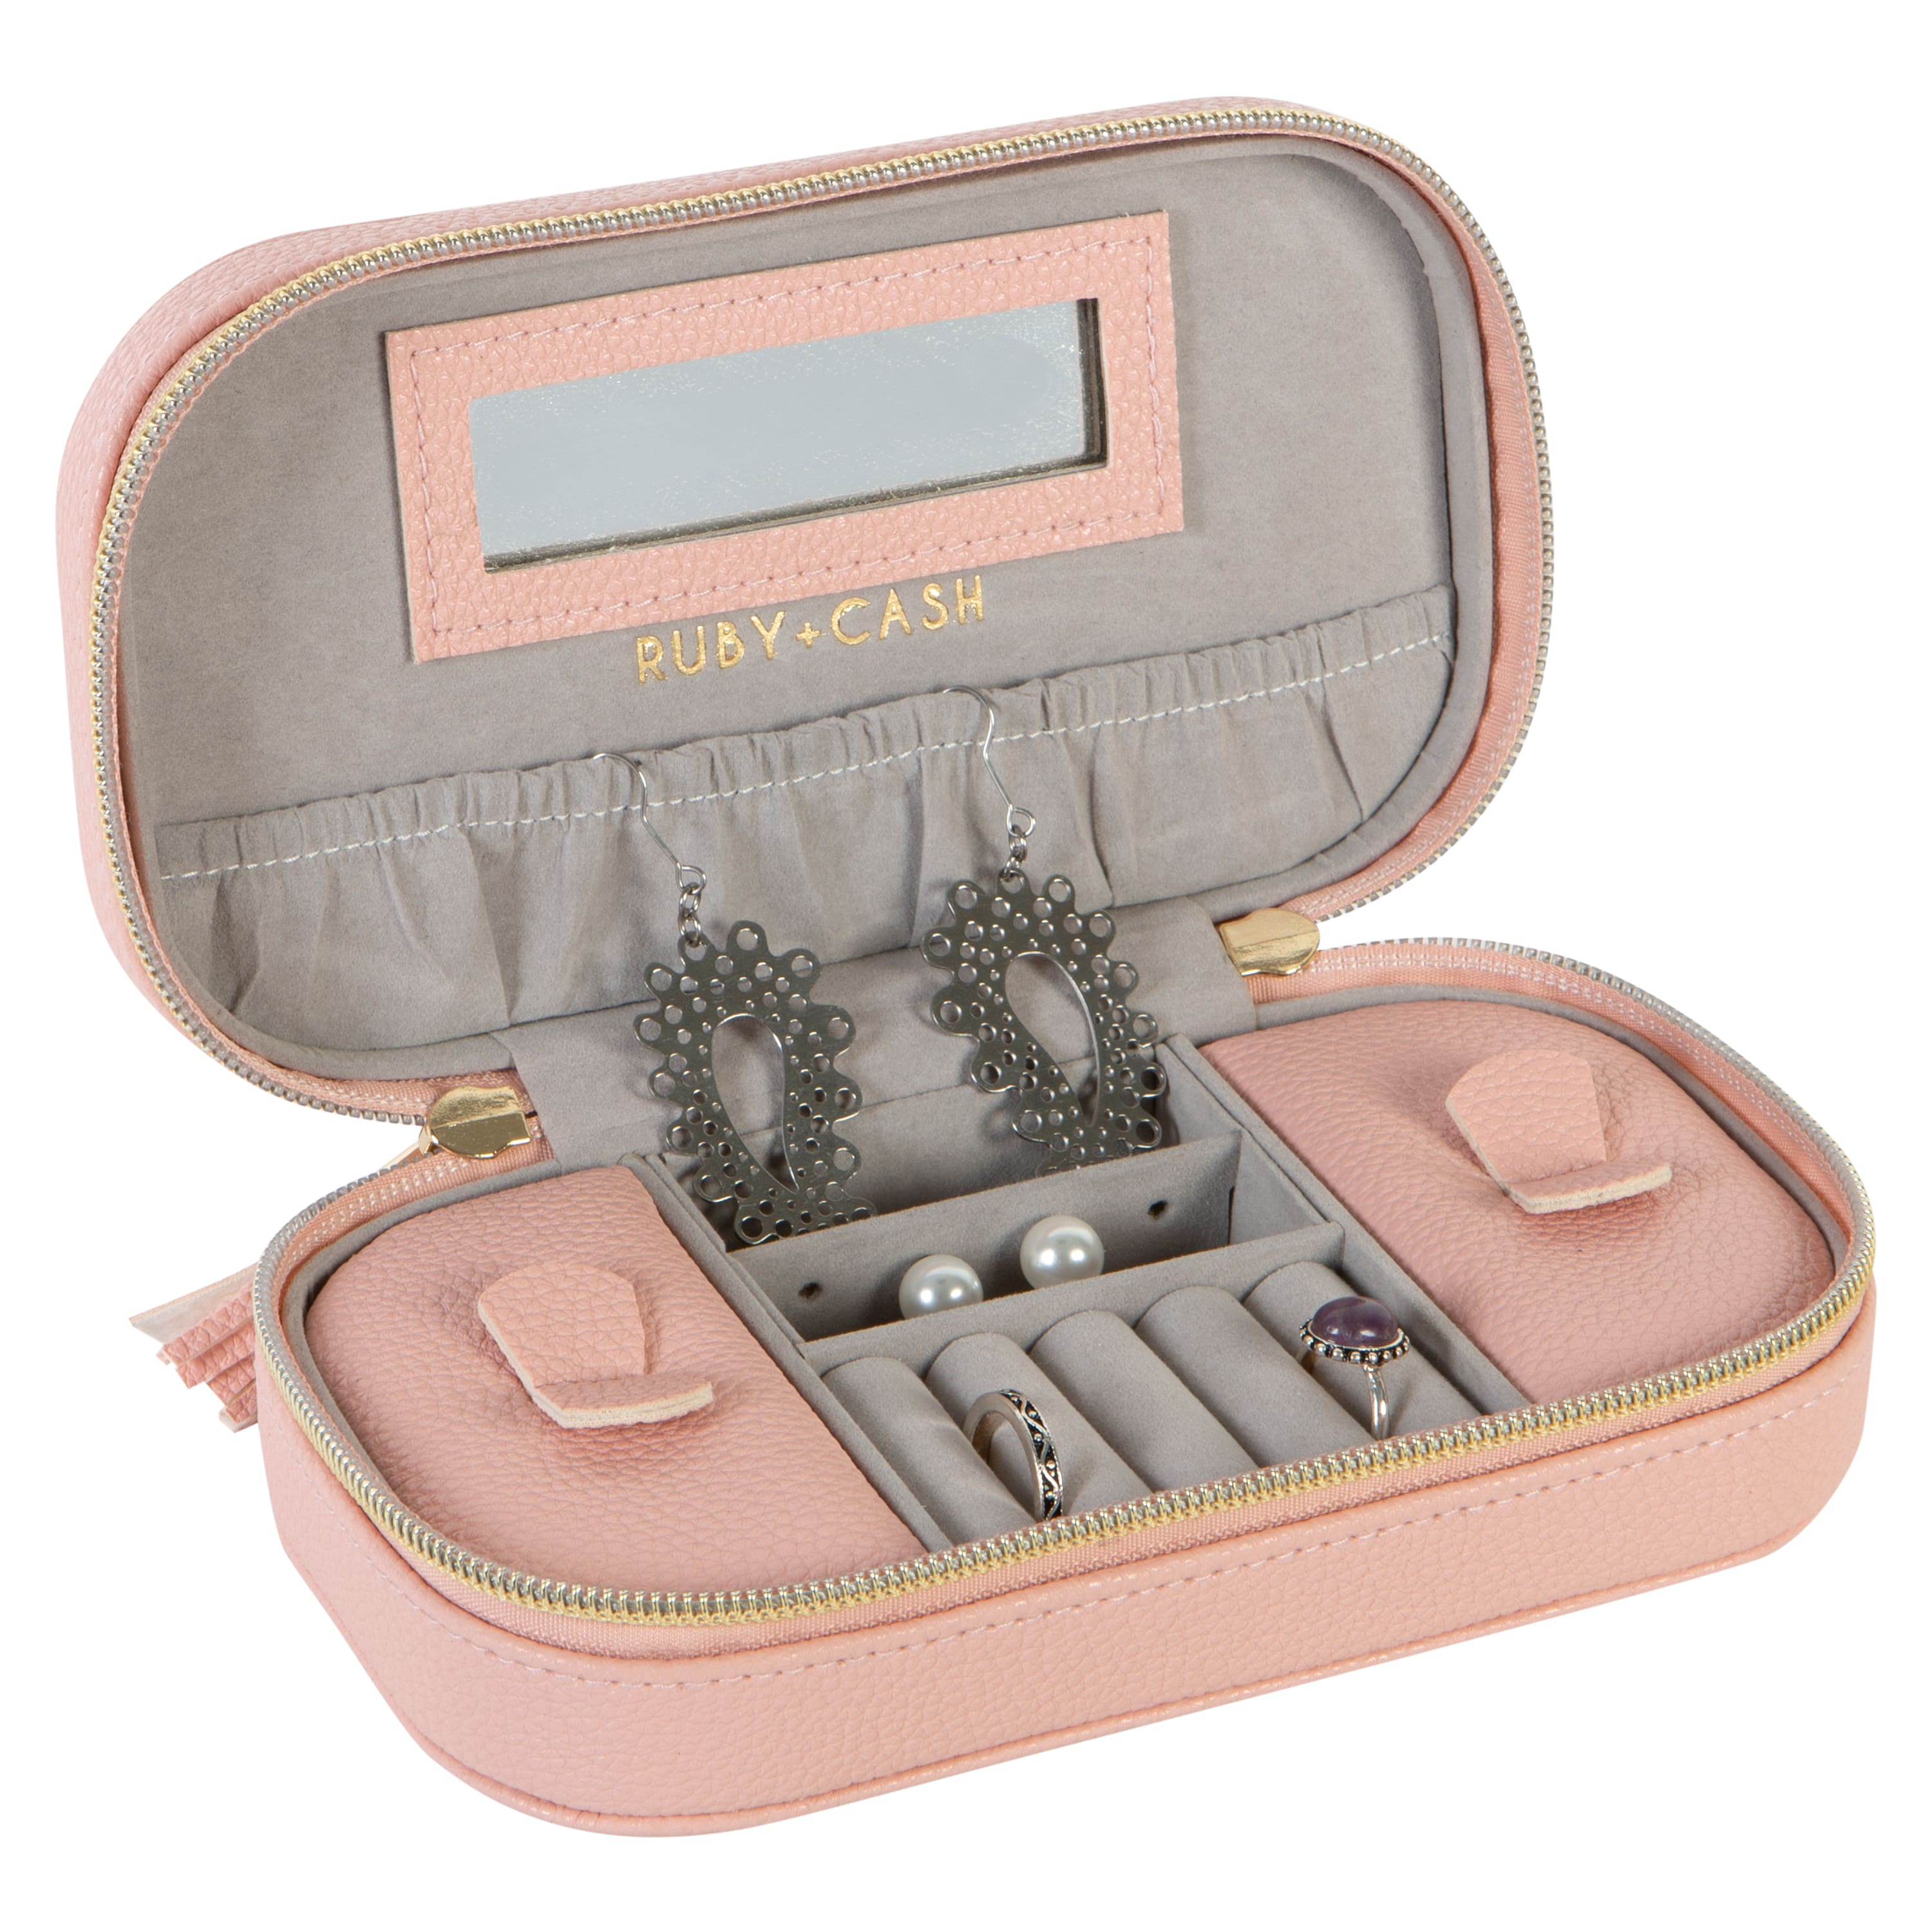 Sml Travel Jewelry Case - Expressions Jewelers